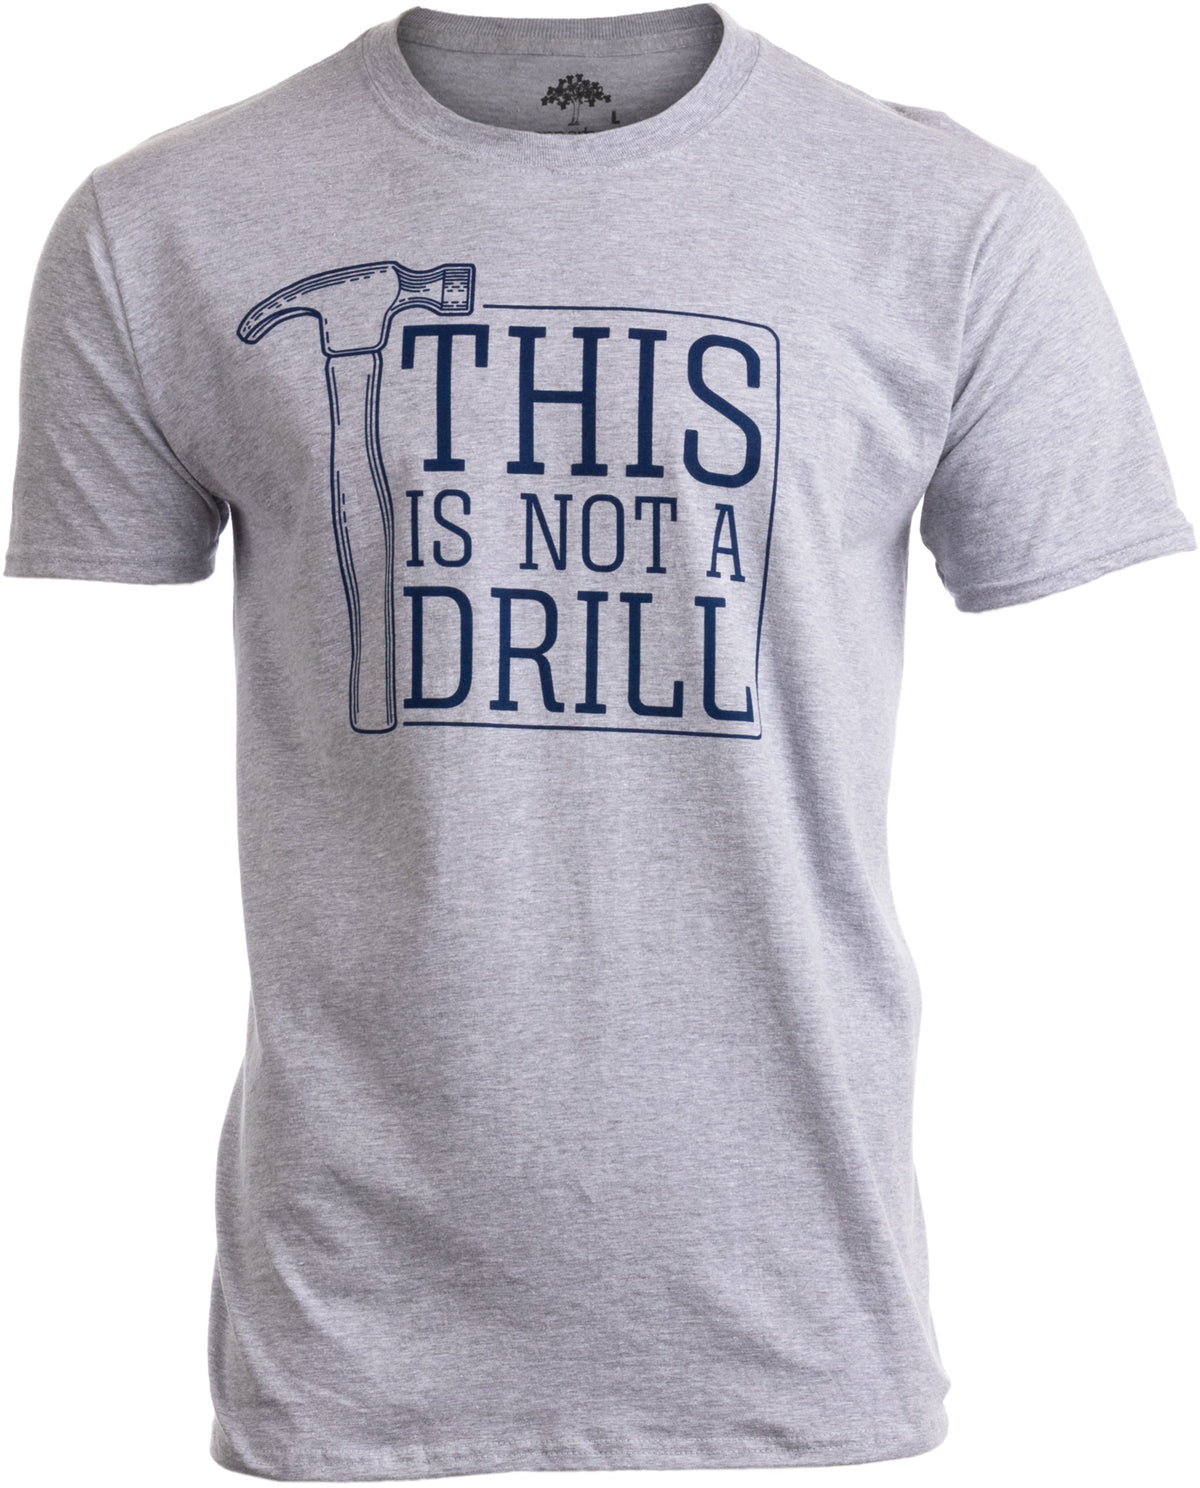 This is Not a Drill - Funny Hammer Repair Dad Joke Tool Shop Humor T-shirt